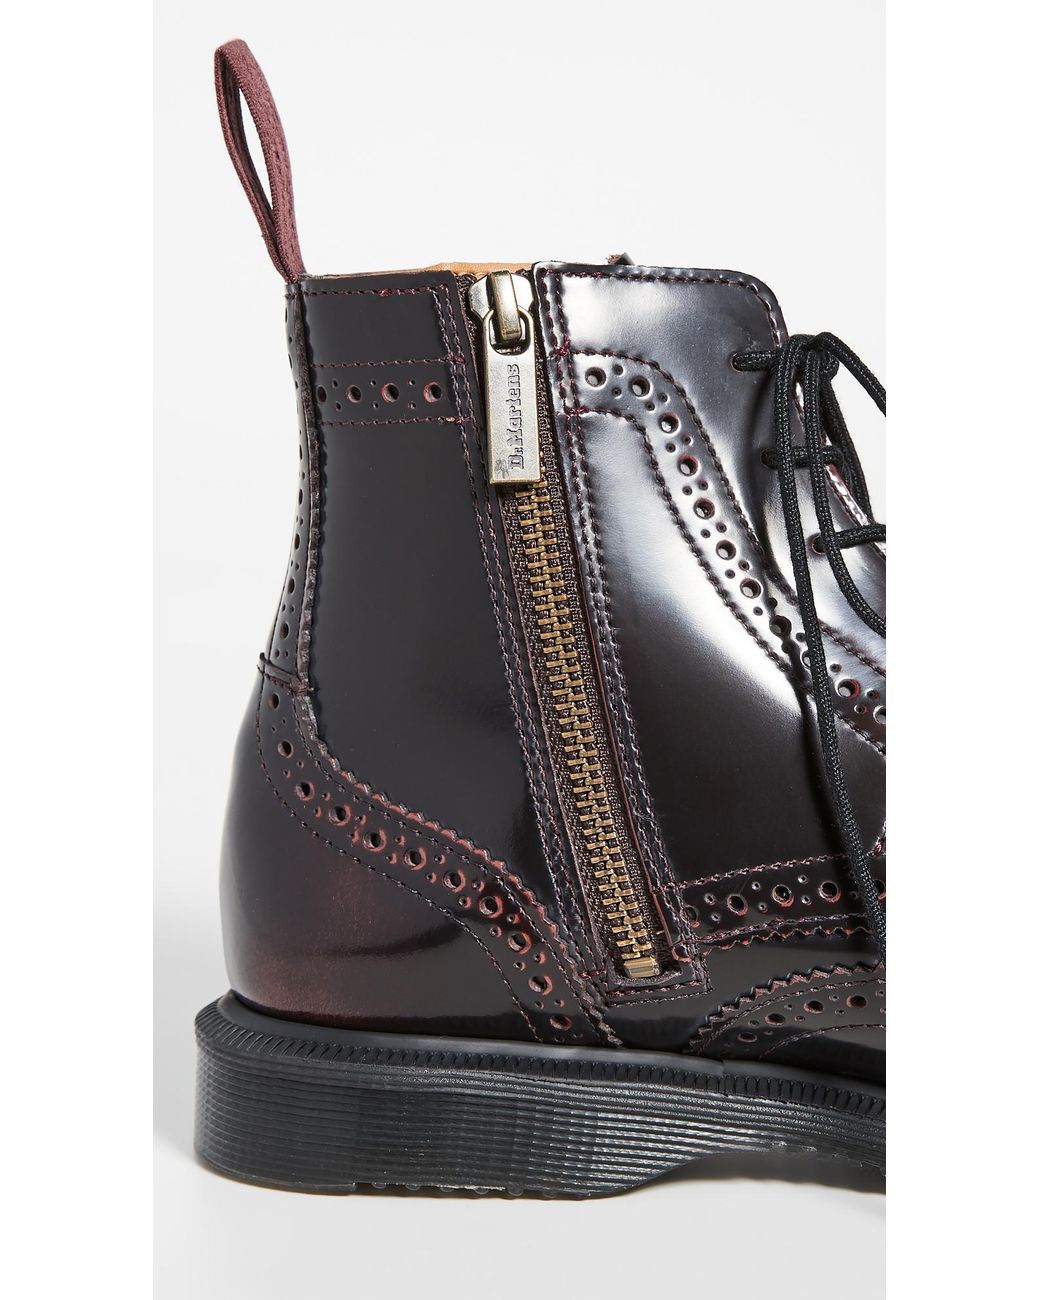 Dr. Martens Delphine 6 Eye Brogue Boots in Black | Lyst